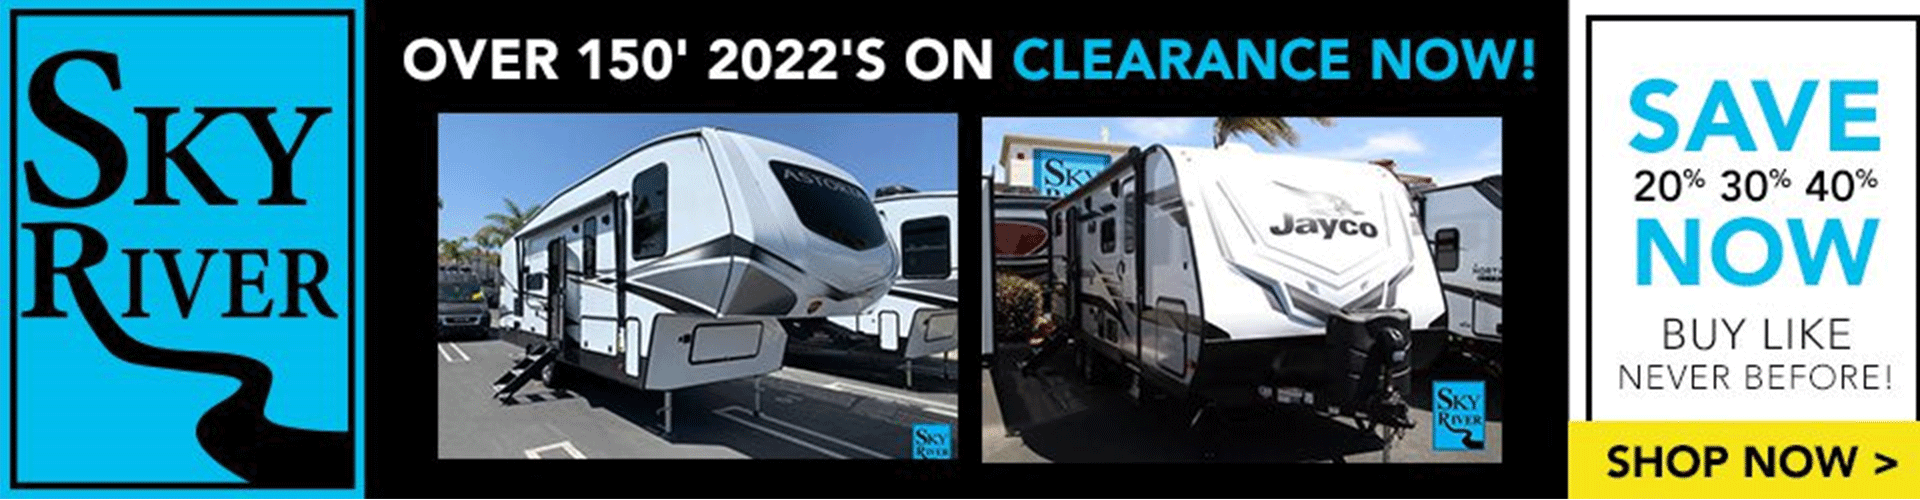 2022's clearance